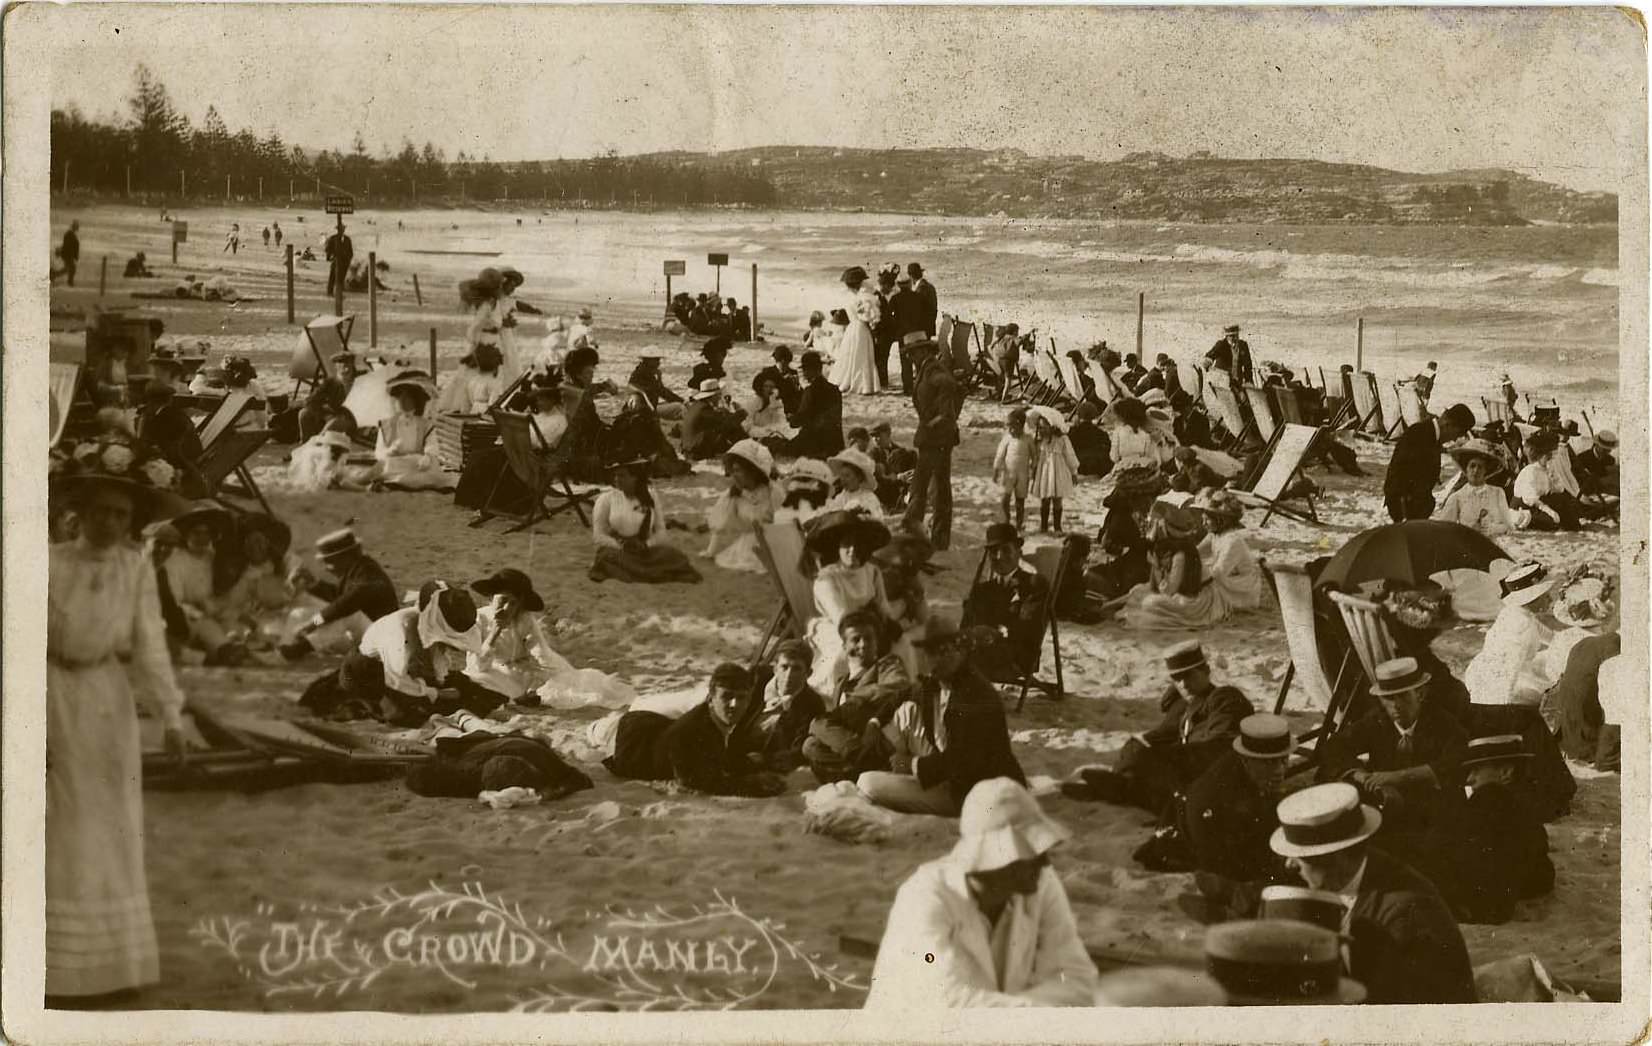 People enjoy a day at the beach in Manly, Australia in 1890. I don't know why it appears no one is in the water, but as you can see, everyone is very overly dressed for what most of us would consider the beach. Not a single elbow, knee, shoulder, or back is showing on any of the beachgoers. The ones sitting in the sand don't even have anything underneath them, getting sand all in their proper clothing. This image was used for a postcard to advertise Manly. If anyone was swimming, it would be in full body suits, also barely showing limbs and not much skin outside of hands, feet, and the head, as was common for the time period.